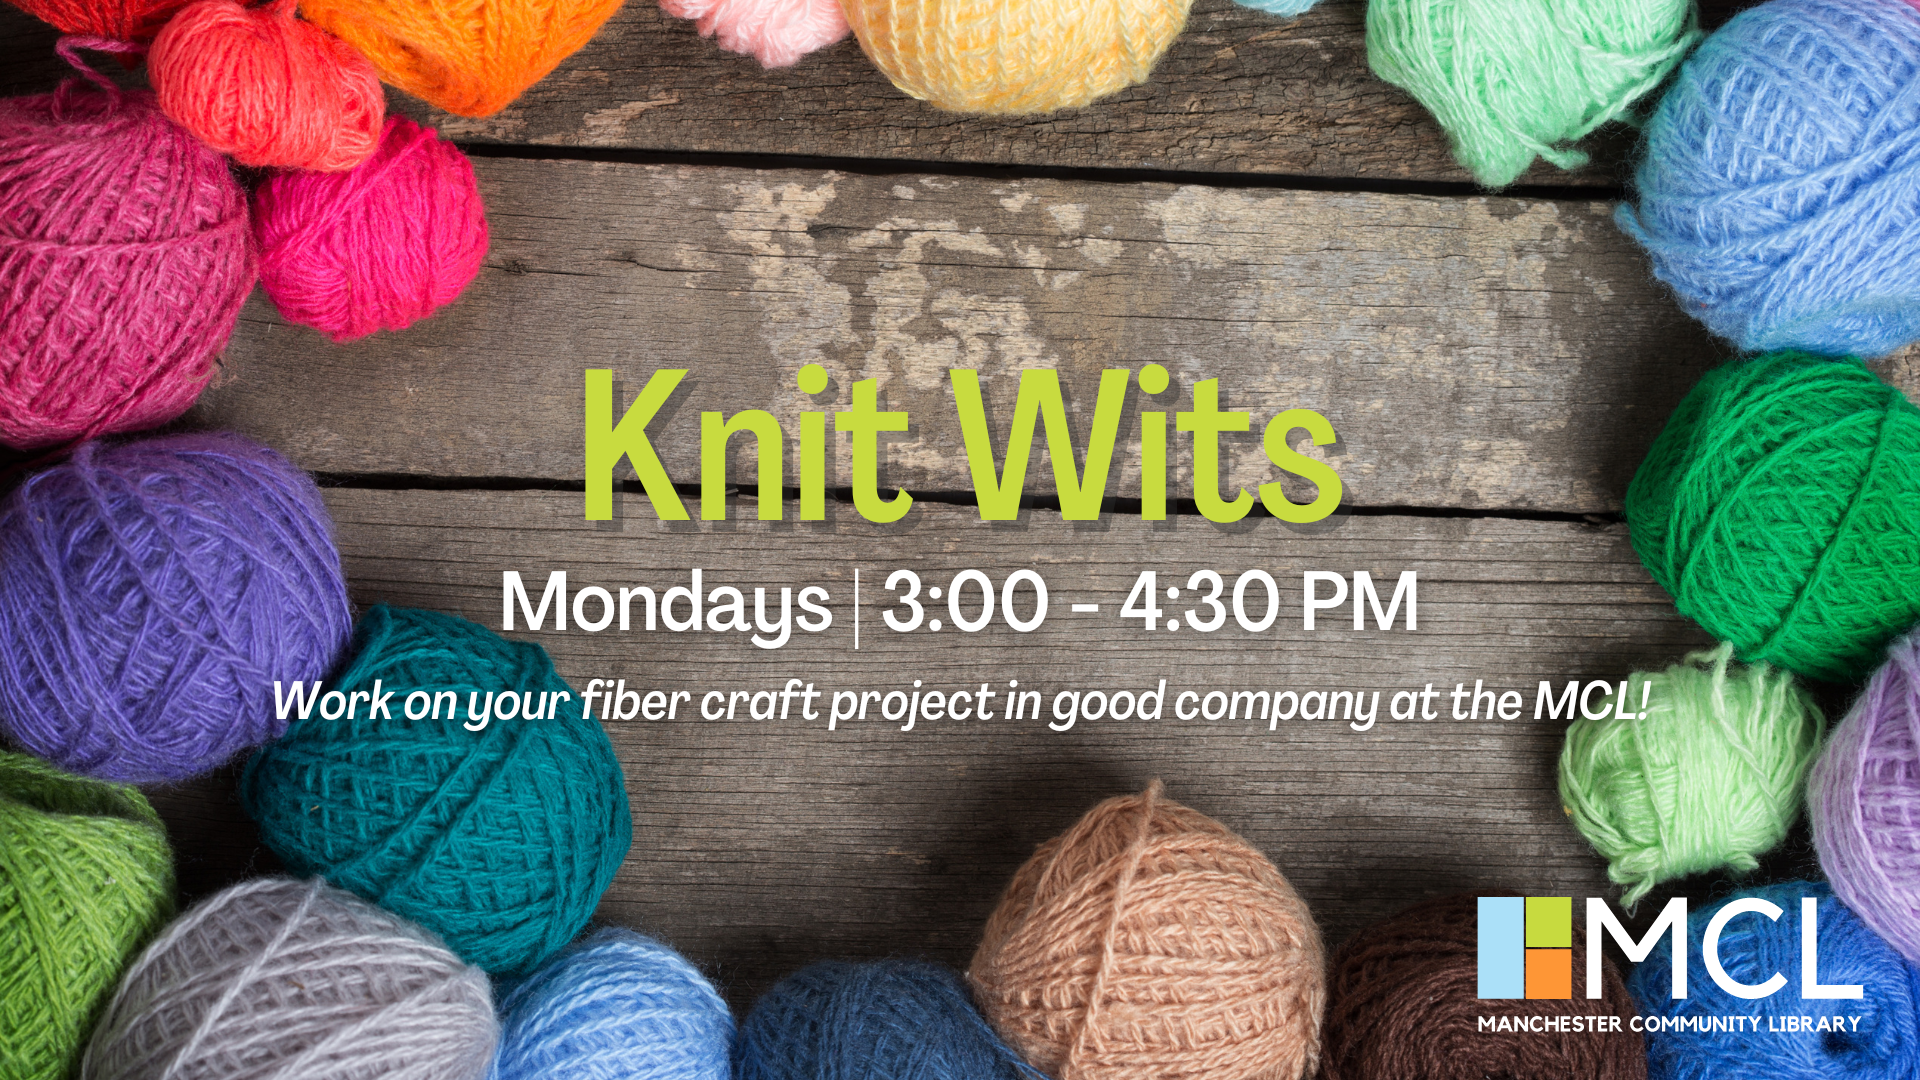 Knit Wits: Work on your fiber craft project in good company Mondays from 3 to 4:30 p.m. at the MCL